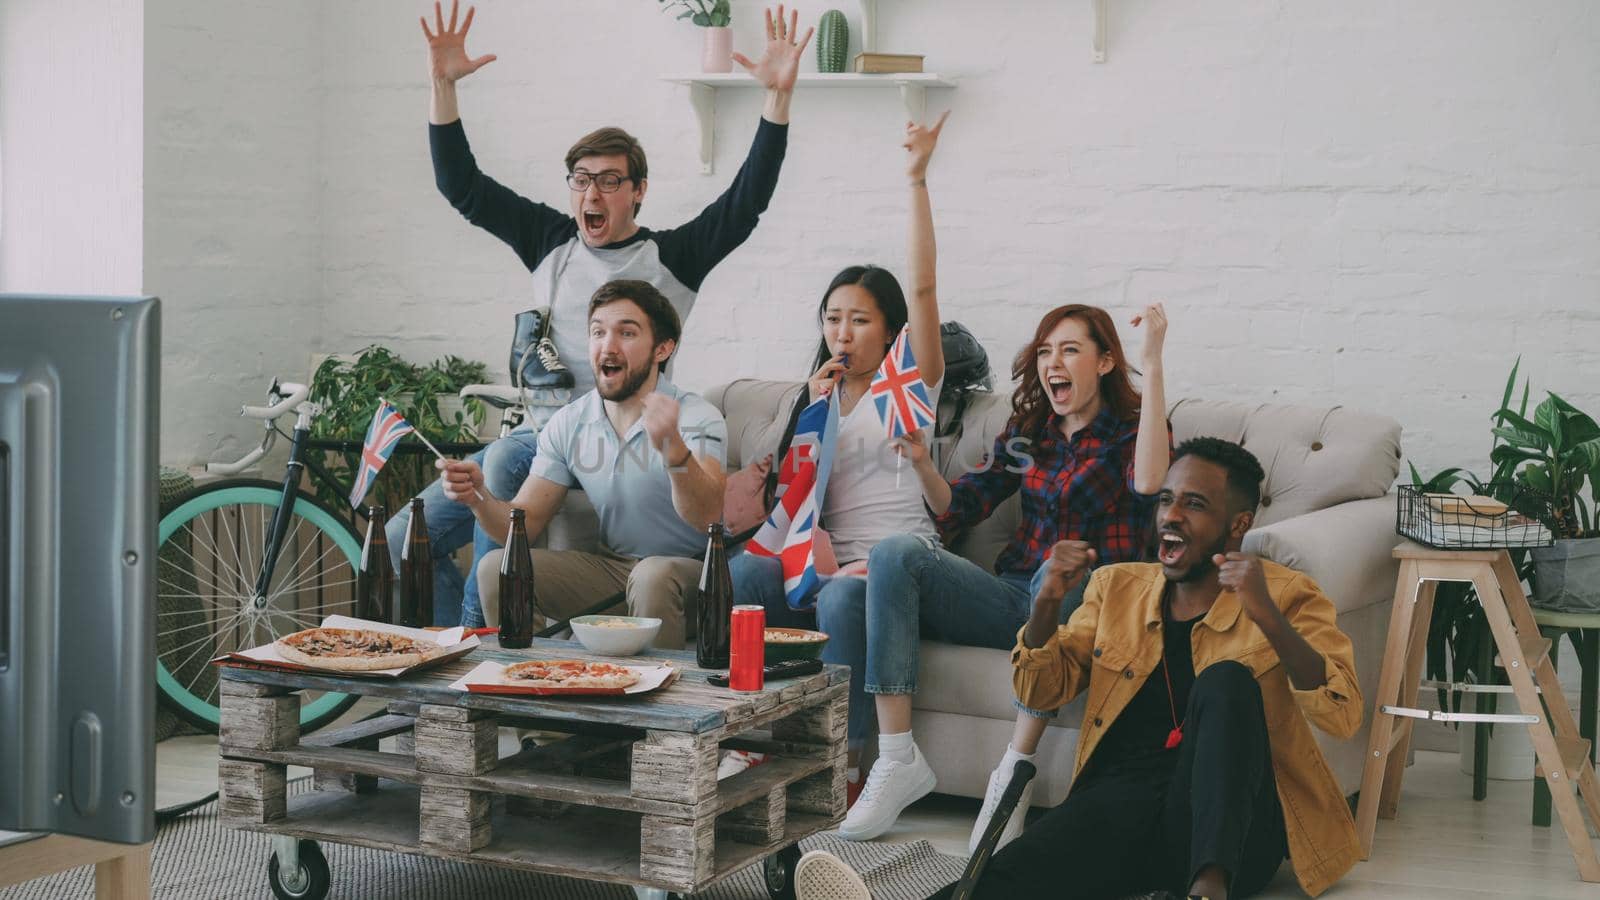 Multi ethnic group of friends sports fans with British national flags watching hockey championship on TV together cheering up their favourite team at home indoors